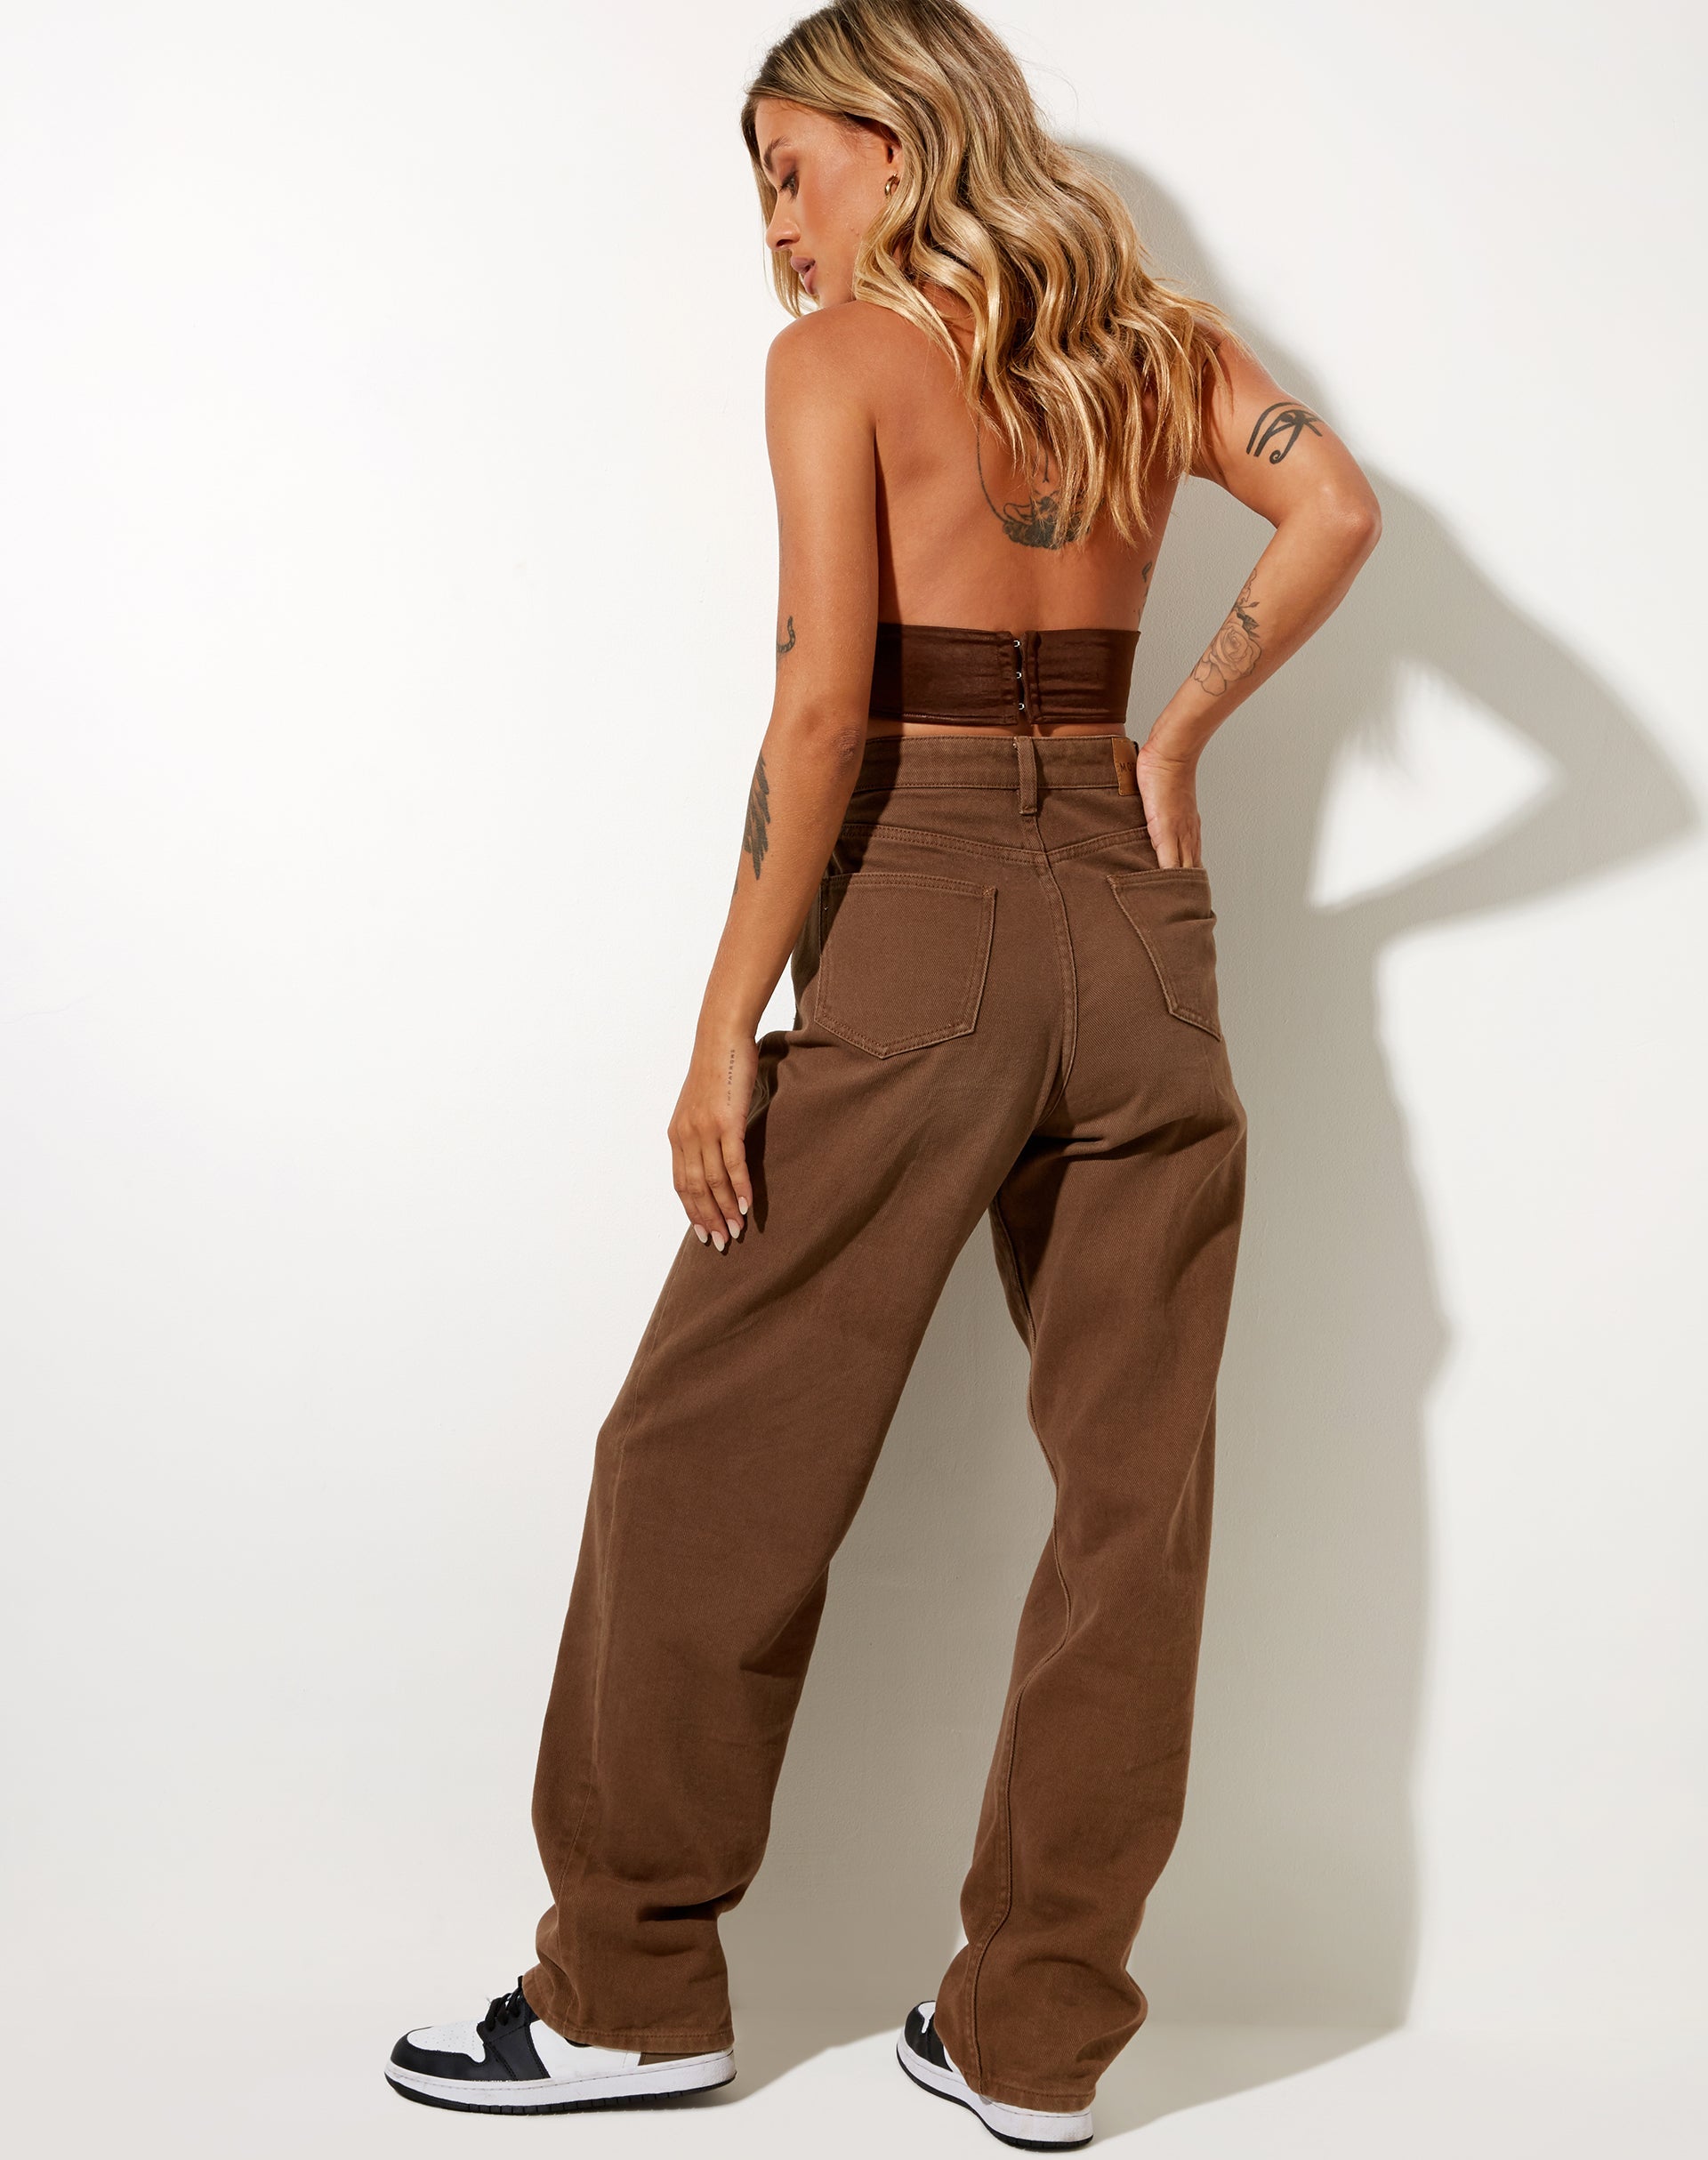 Image of Silta Crop Top in Satin Chocolate